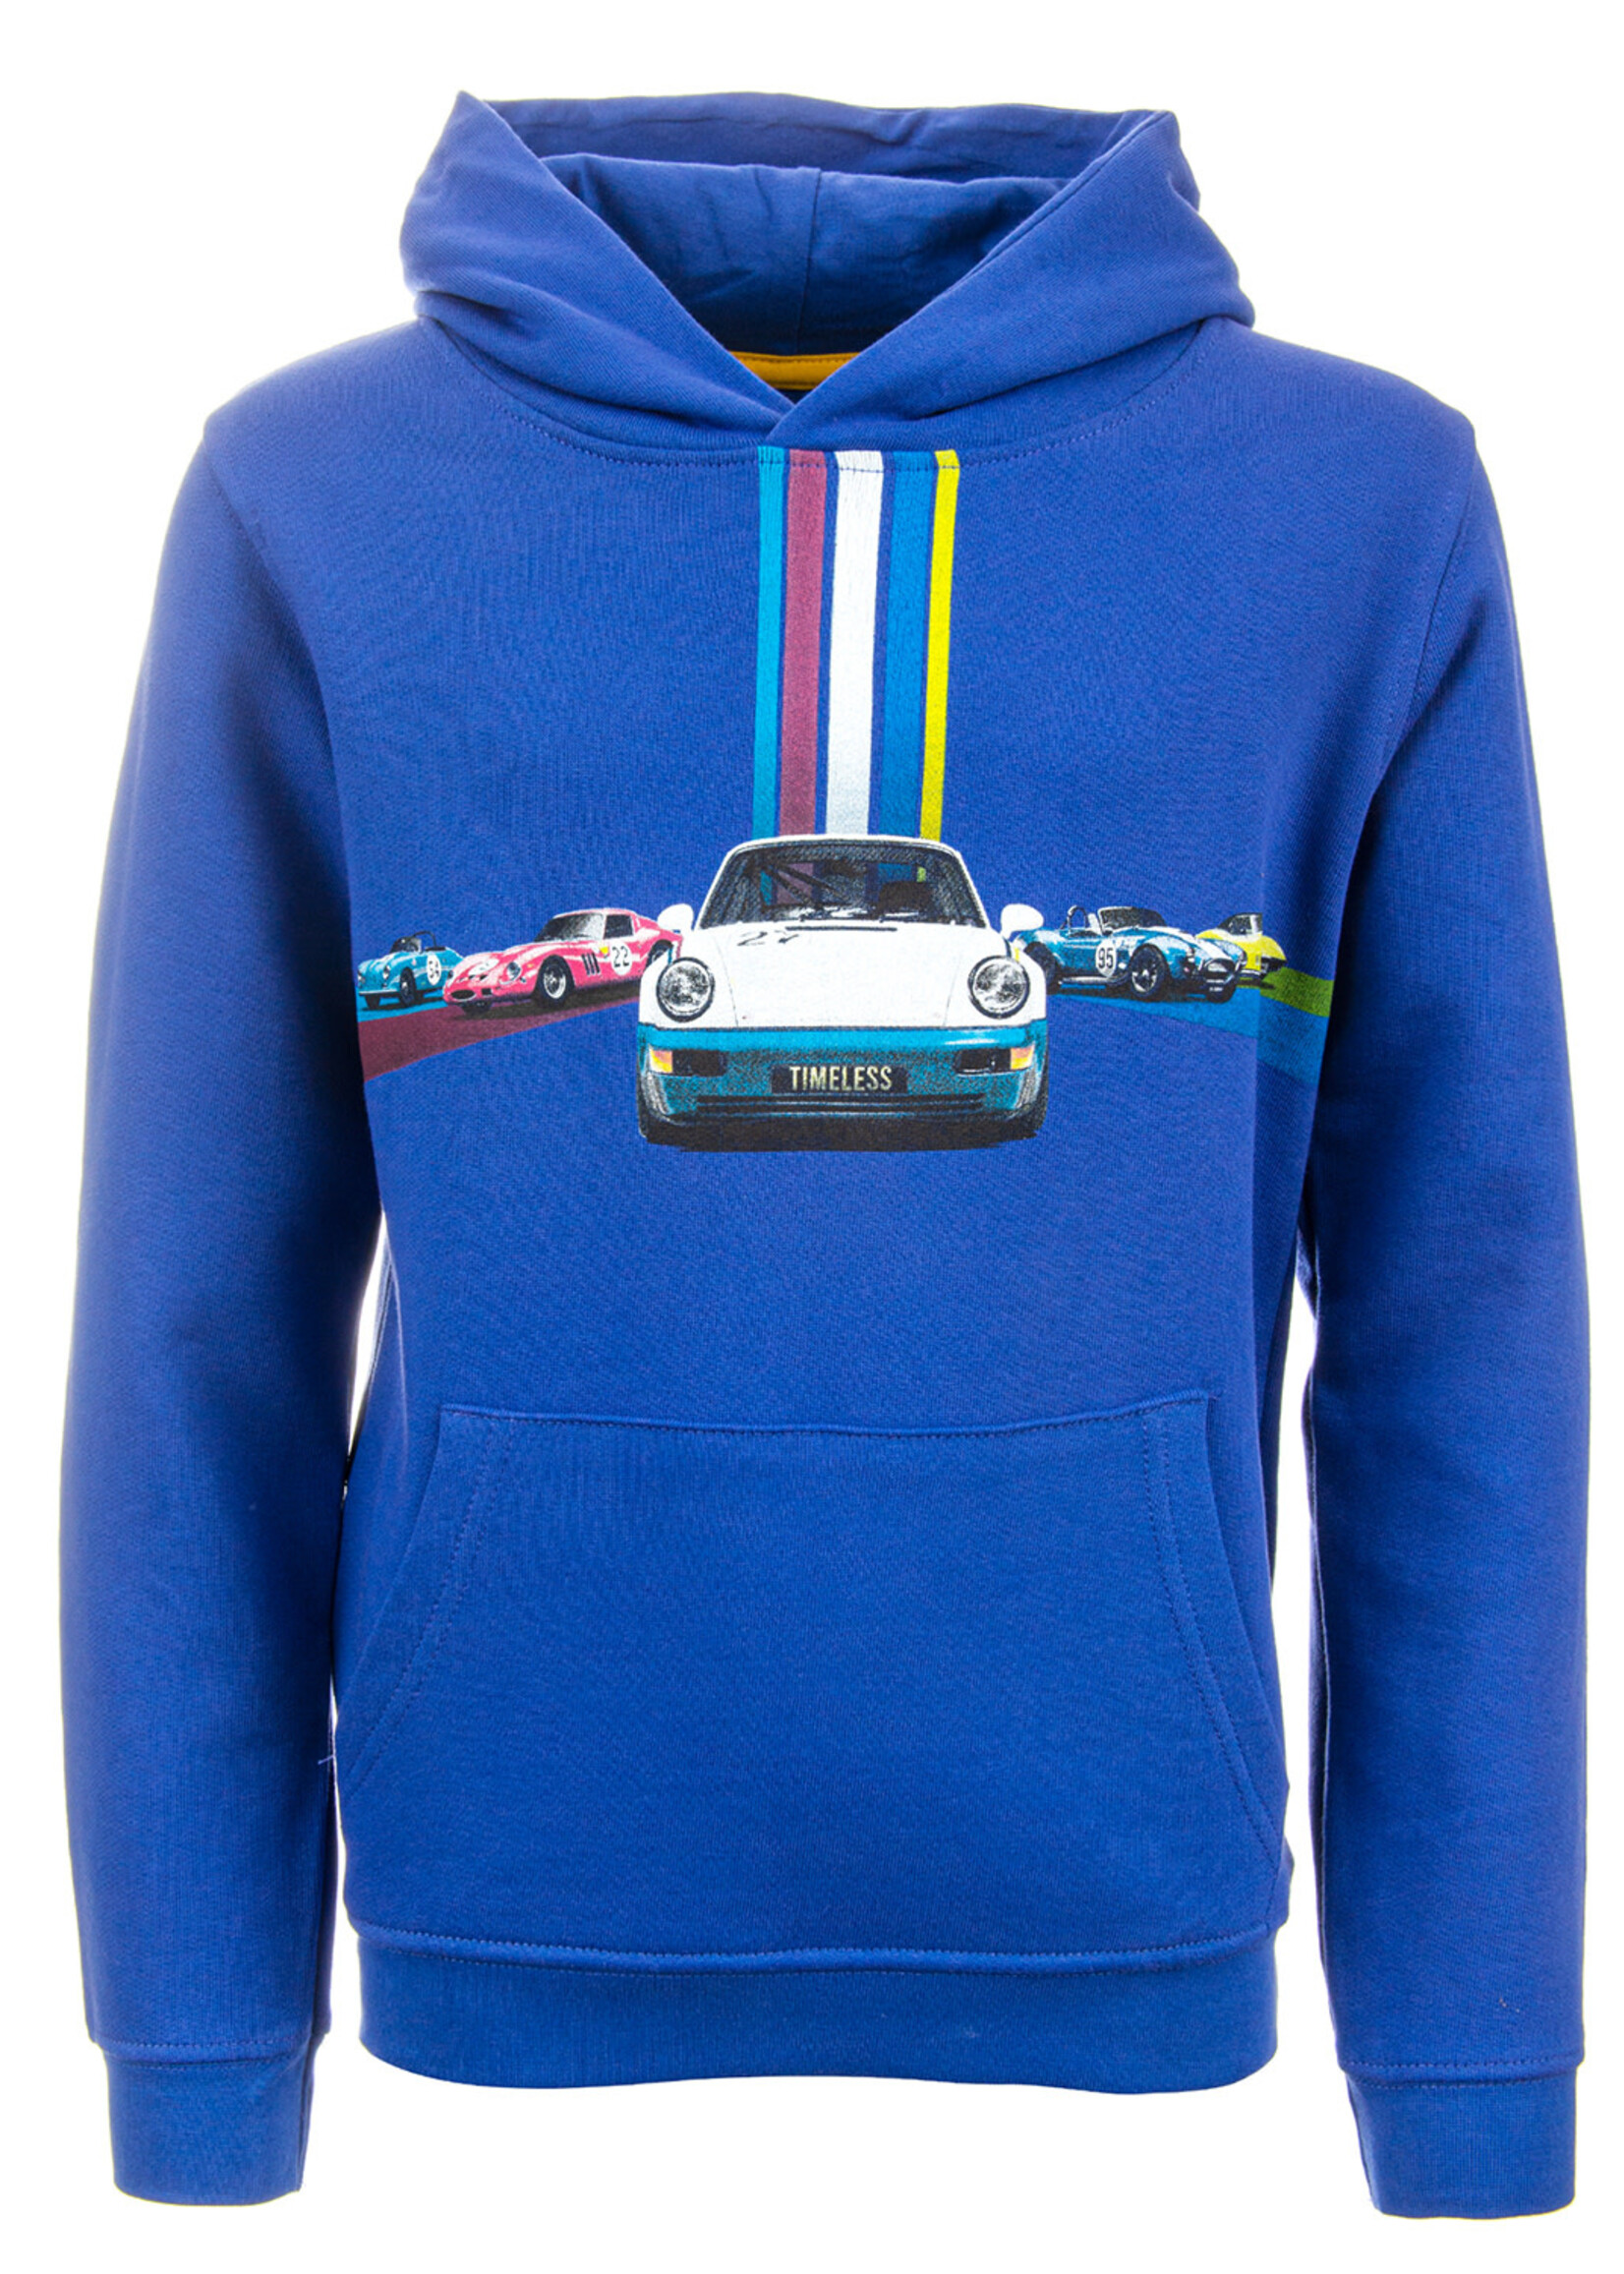 Florida sweater 'Collection' - Electric